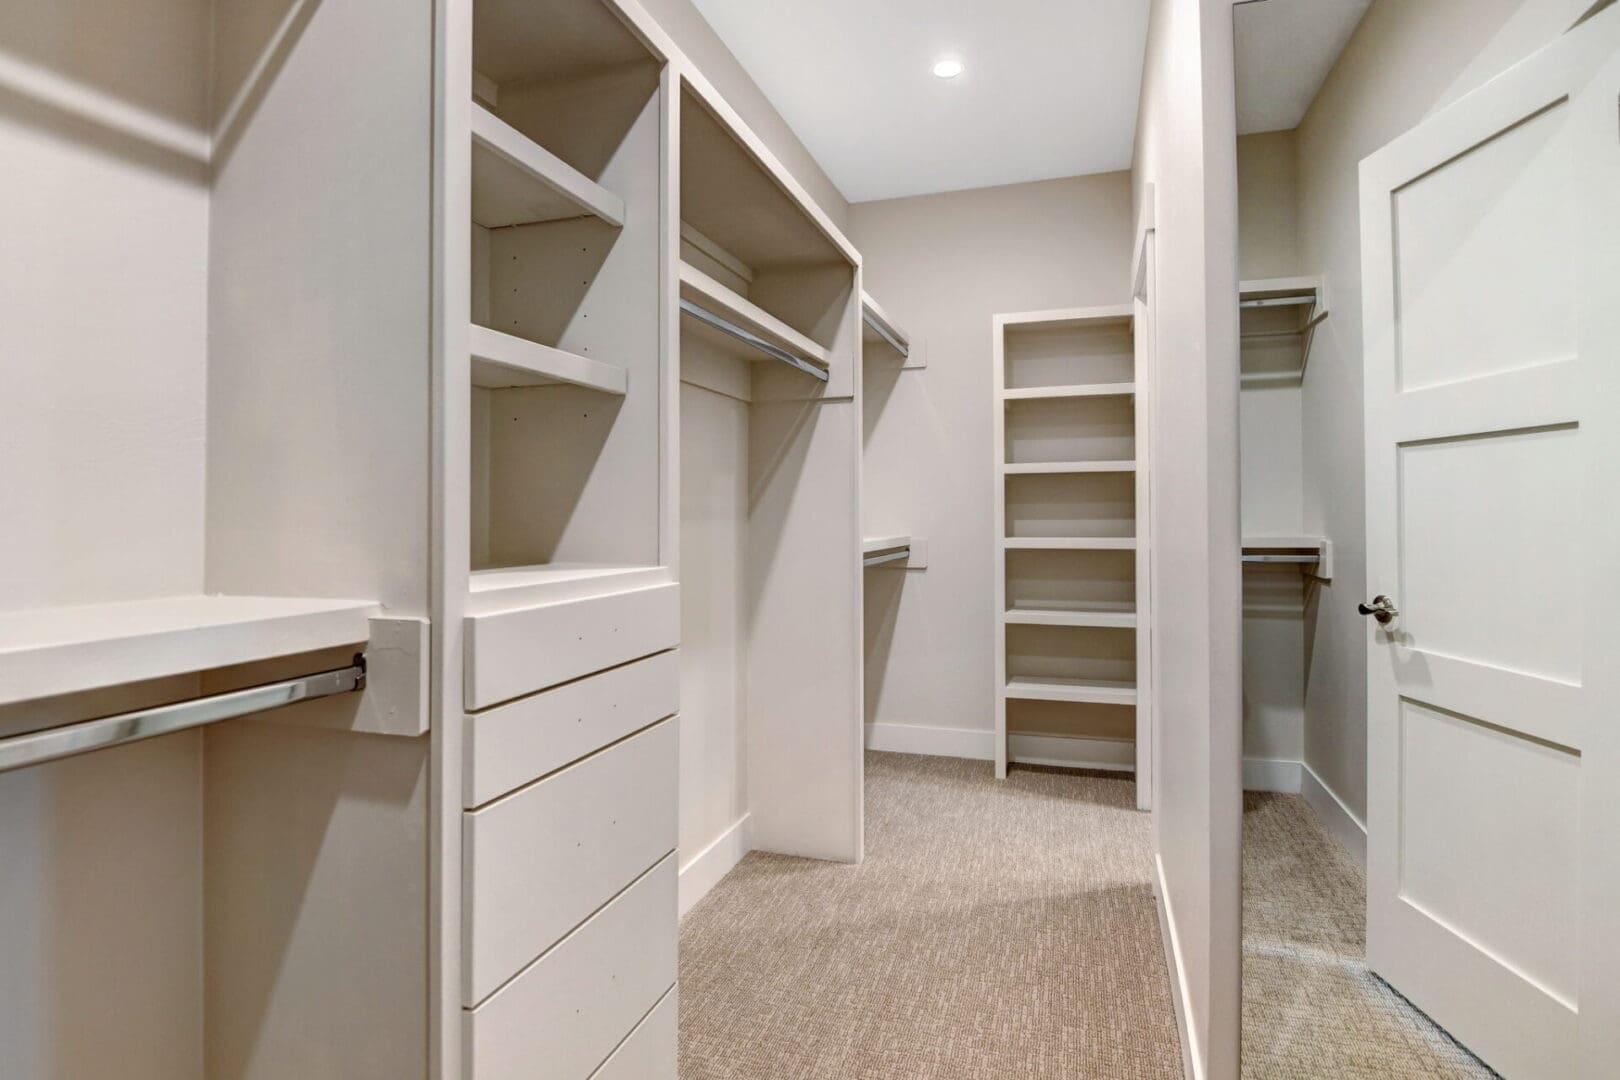 A walk in closet with shelves and drawers